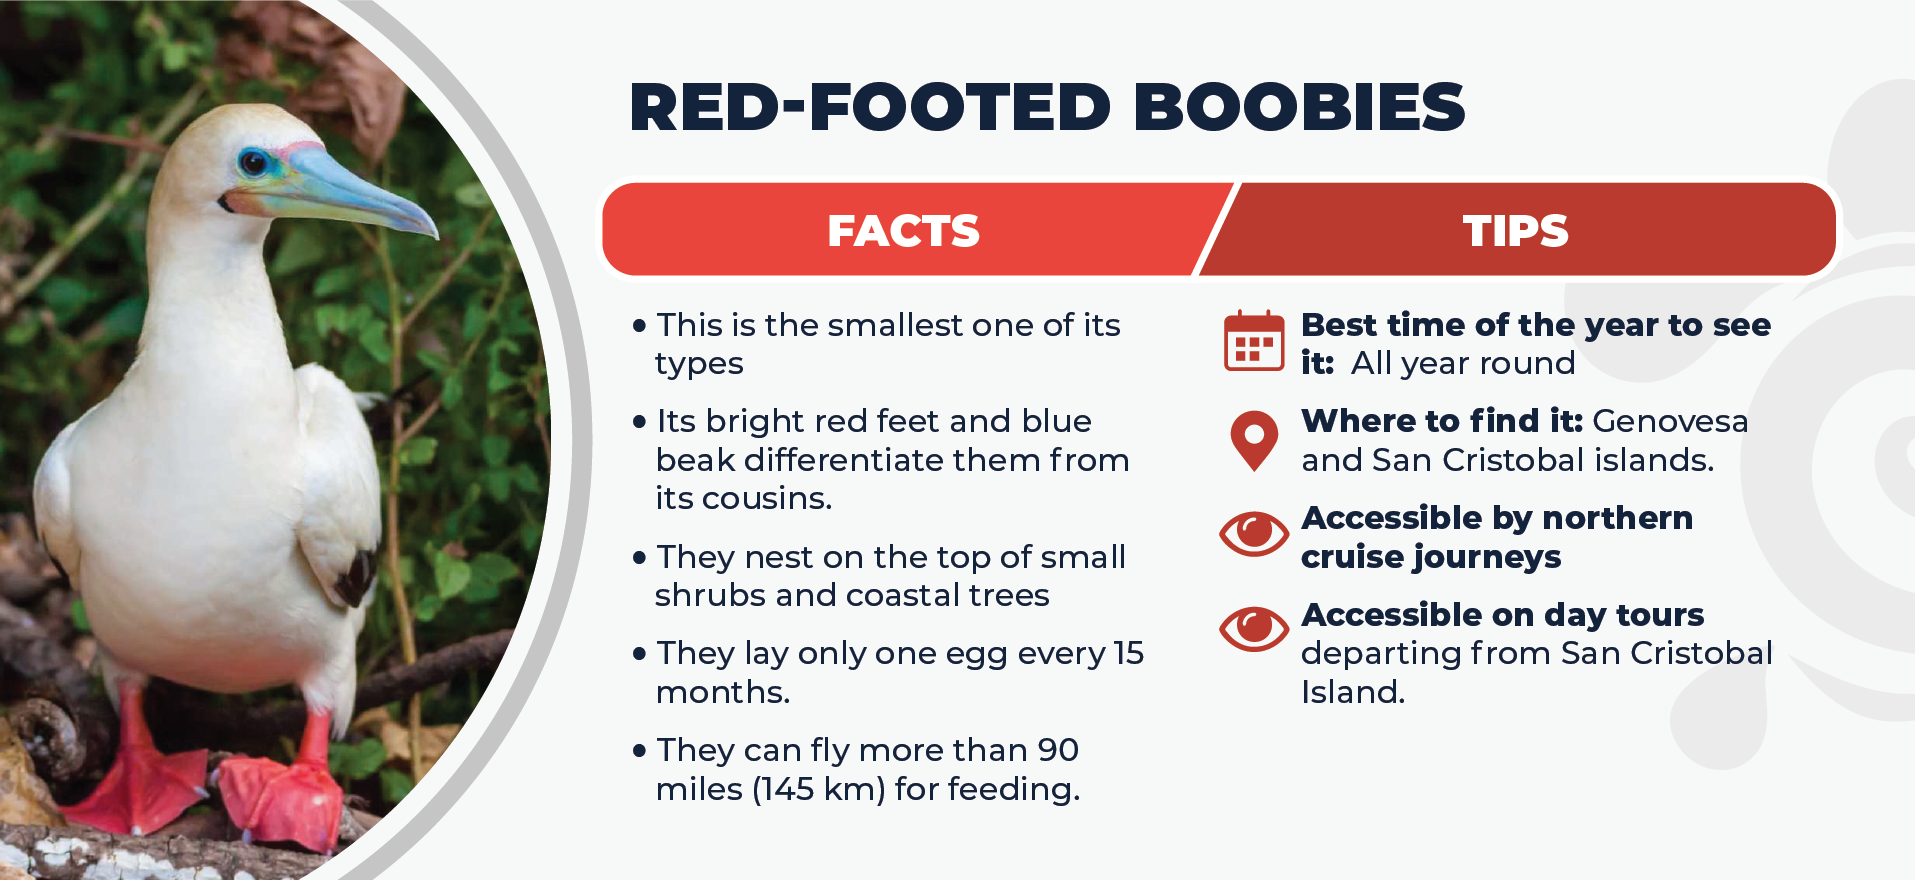 Red-Footed Boobies Facts